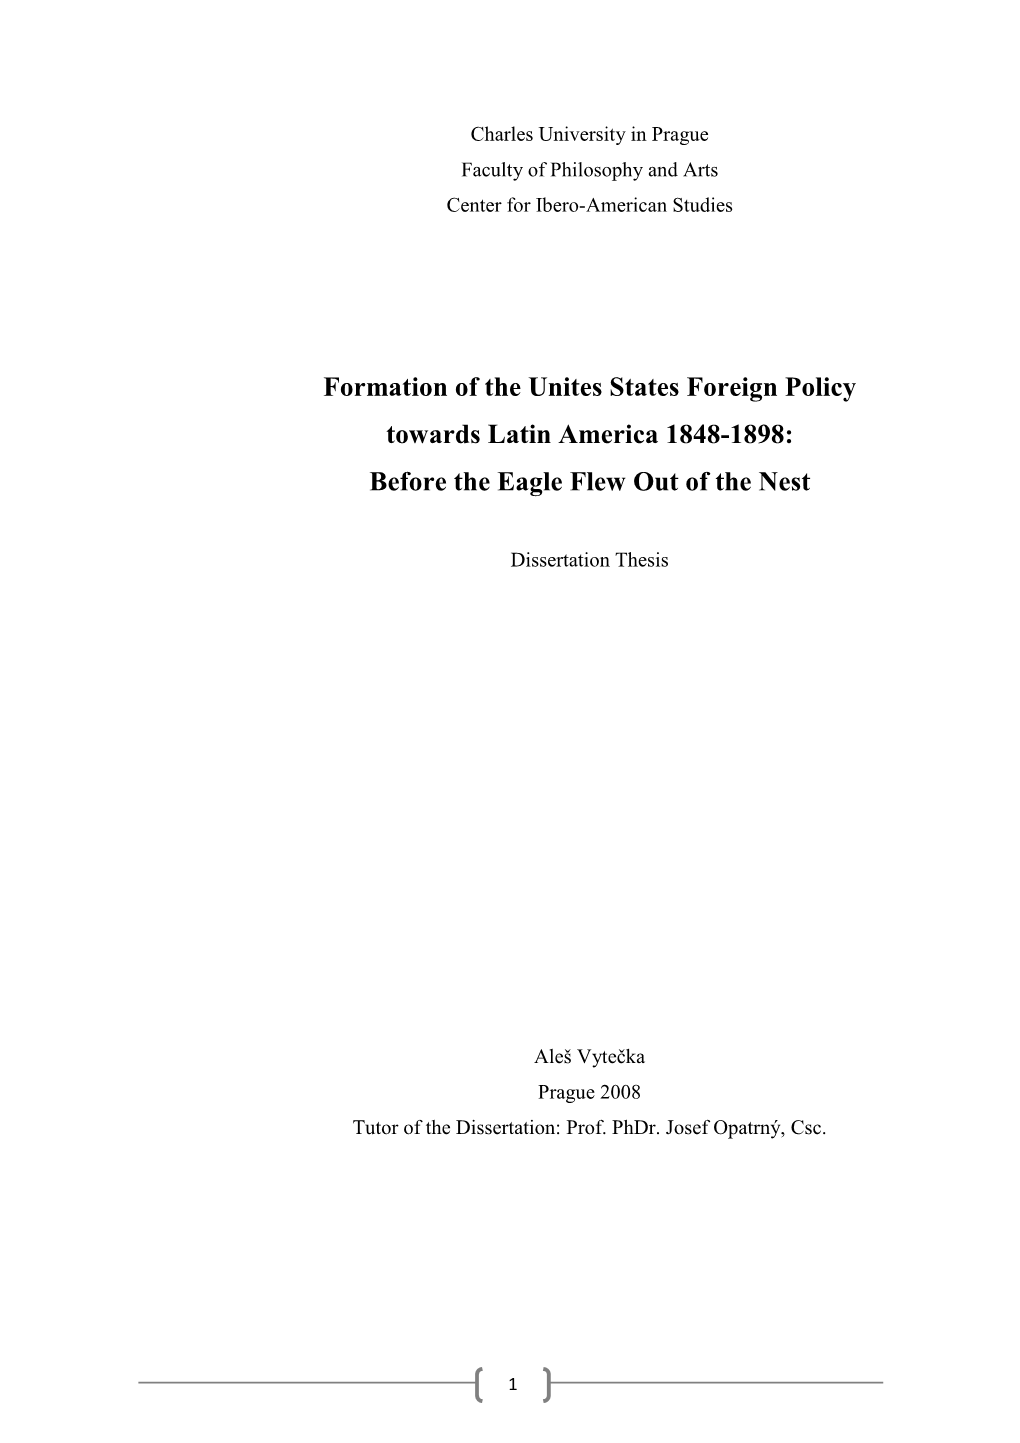 Formation of the Unites States Foreign Policy Towards Latin America 1848-1898: Before the Eagle Flew out of the Nest